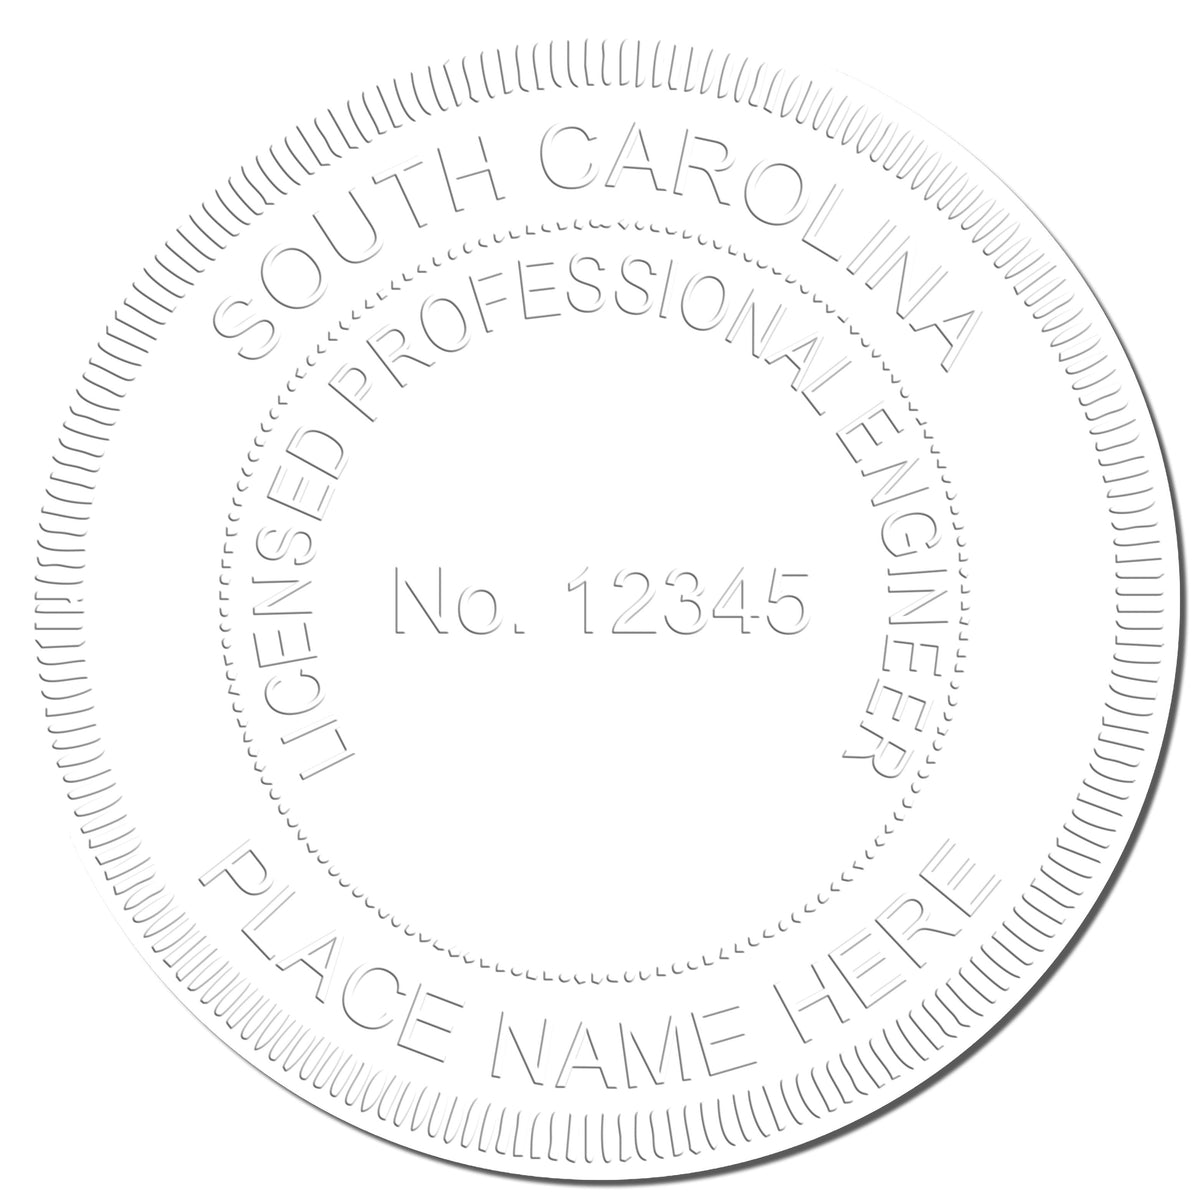 This paper is stamped with a sample imprint of the Heavy Duty Cast Iron South Carolina Engineer Seal Embosser, signifying its quality and reliability.